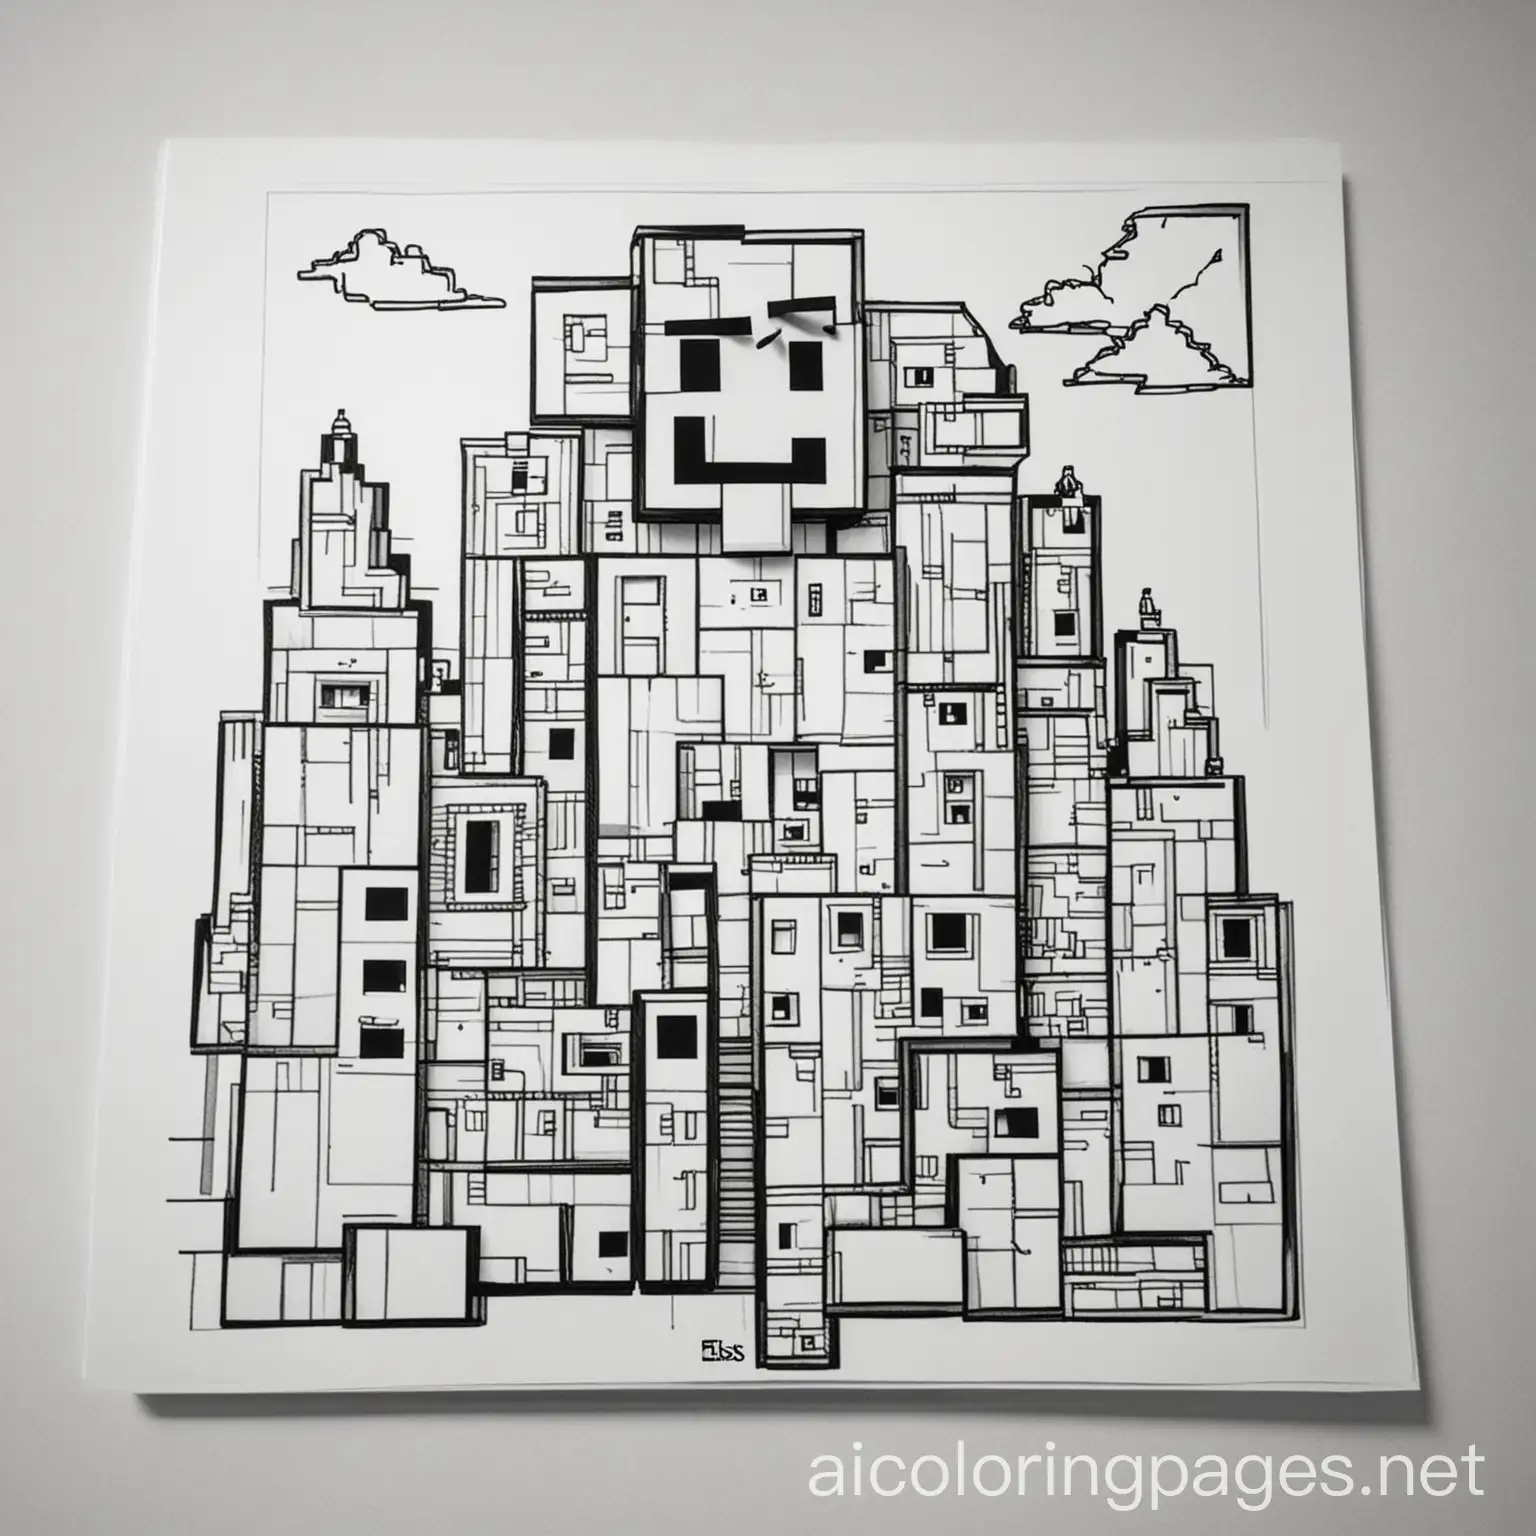 The Name Elis with a minecraft building, Coloring Page, black and white, line art, white background, Simplicity, Ample White Space. The background of the coloring page is plain white to make it easy for young children to color within the lines. The outlines of all the subjects are easy to distinguish, making it simple for kids to color without too much difficulty